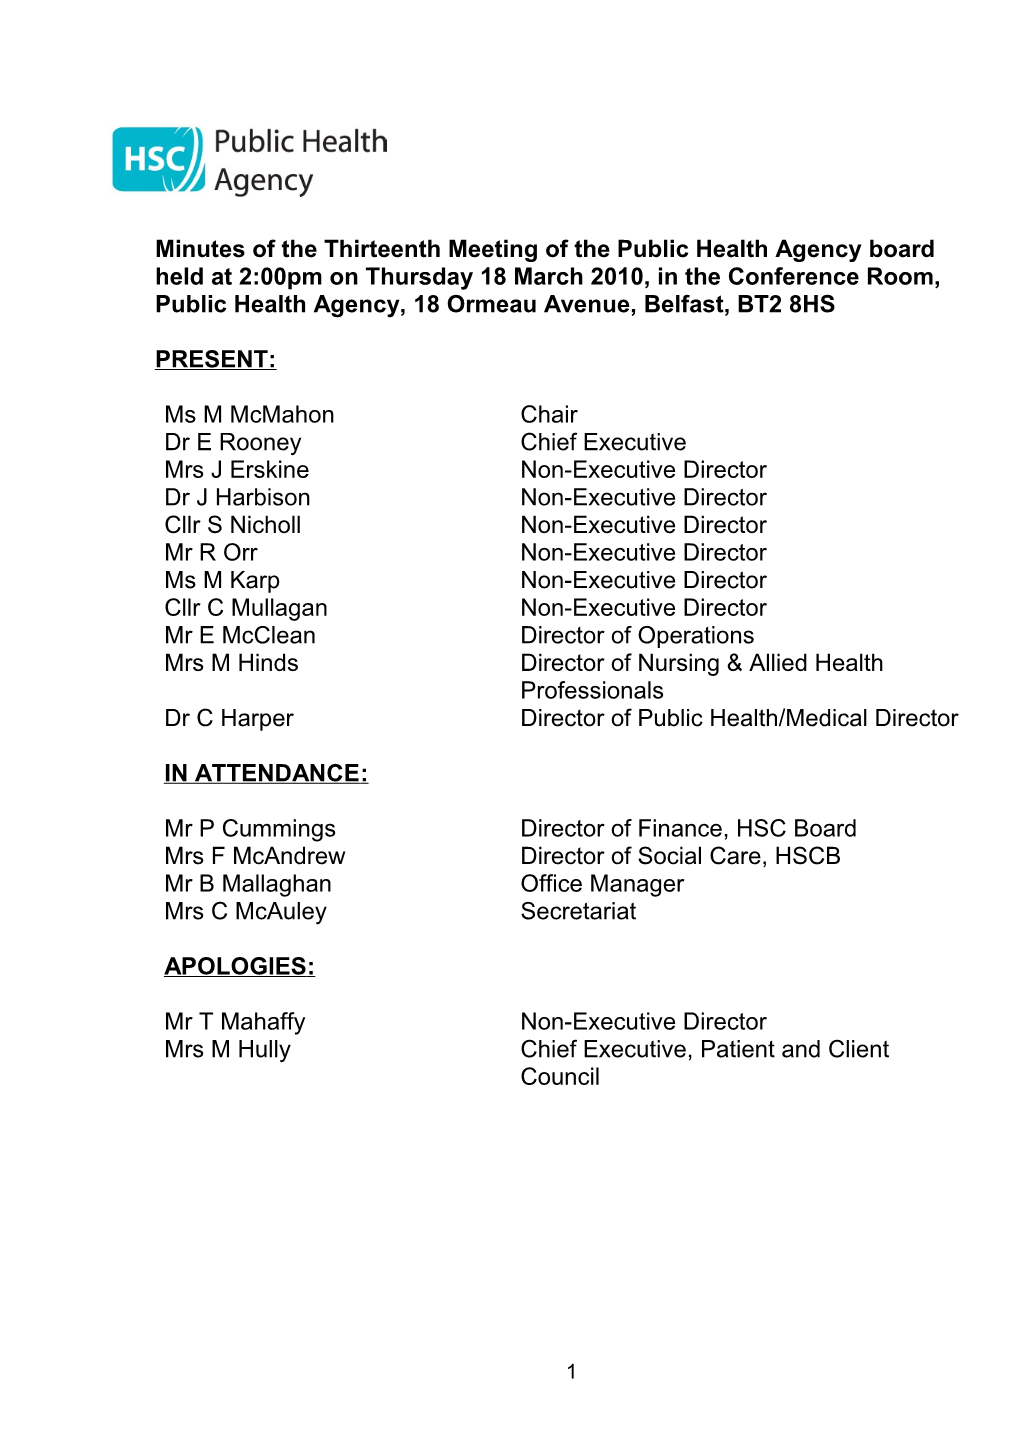 Minutes of the Thirteenth Meeting of the Public Health Agency Board